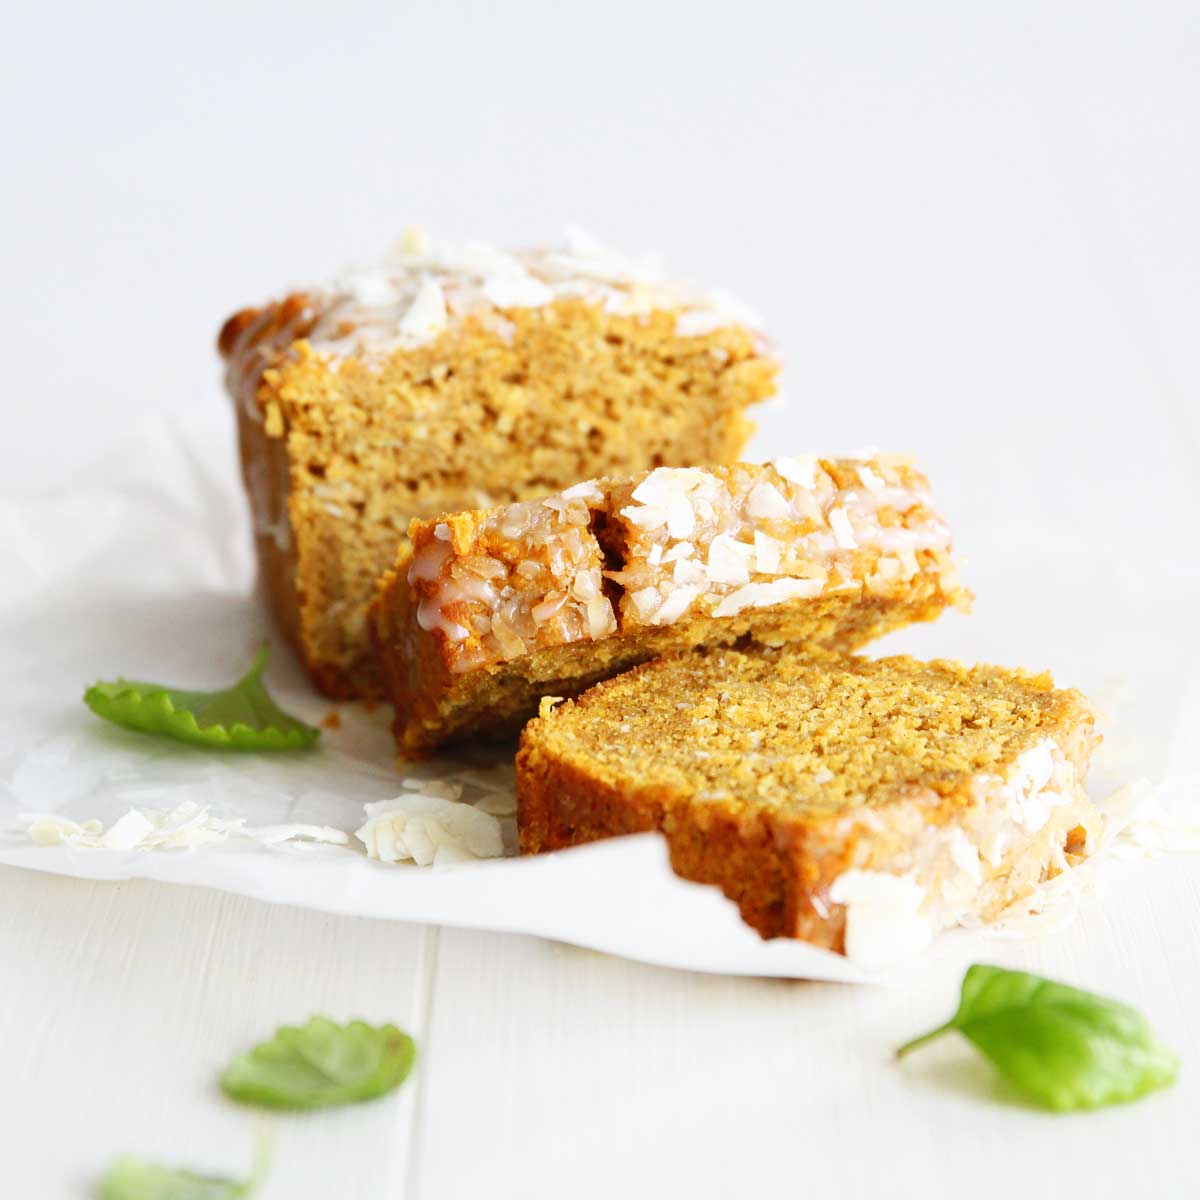 Coconut Pumpkin Bread with Added Almond Flour & Oats - Brown Sugar Whipped Cream